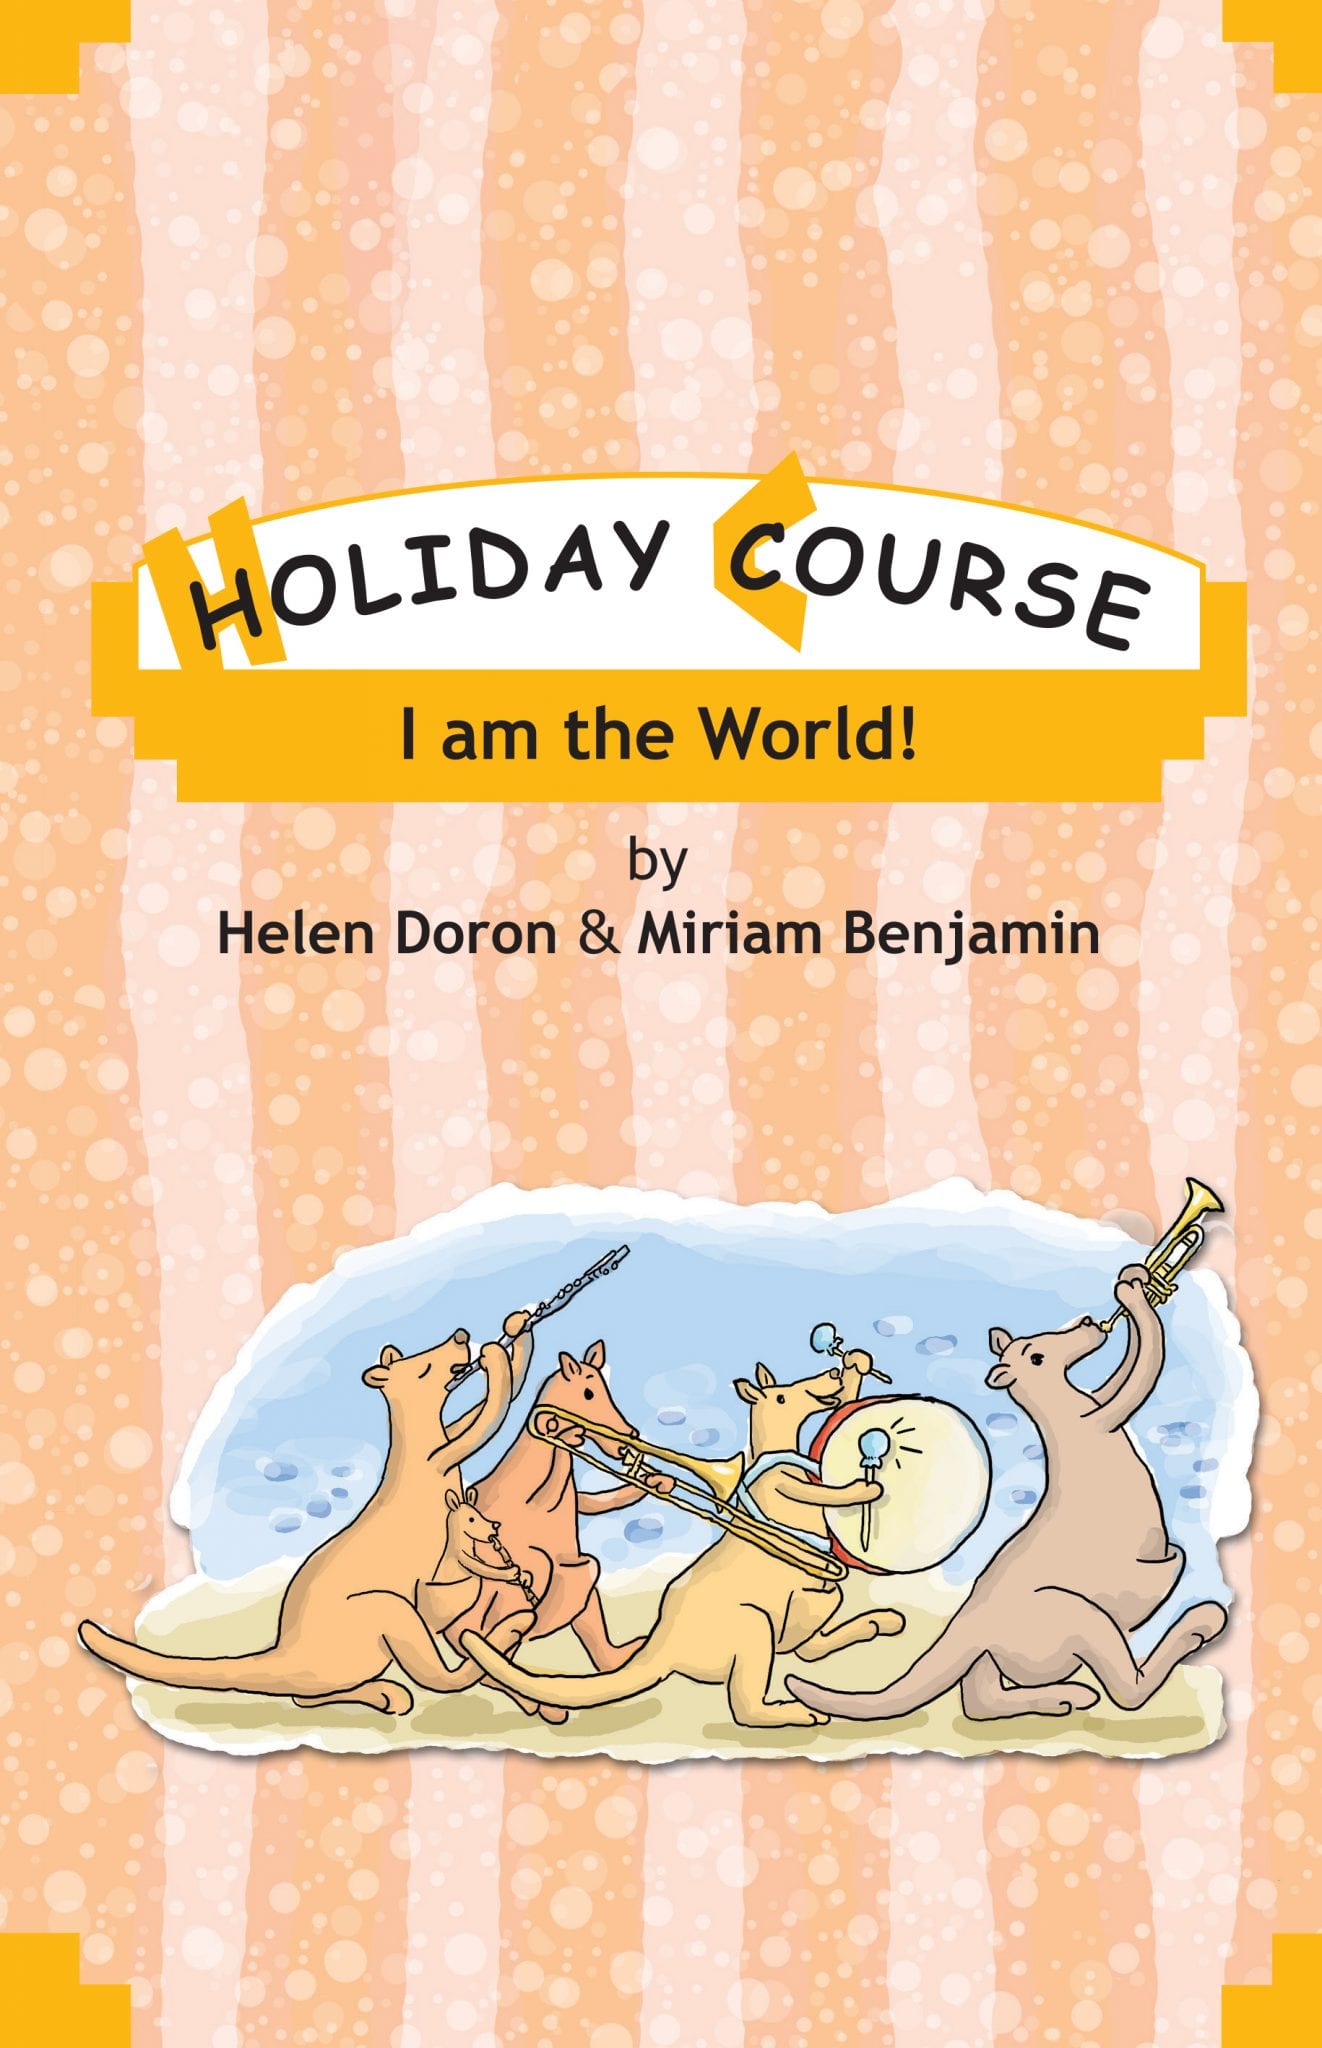 I am the World Holiday Course